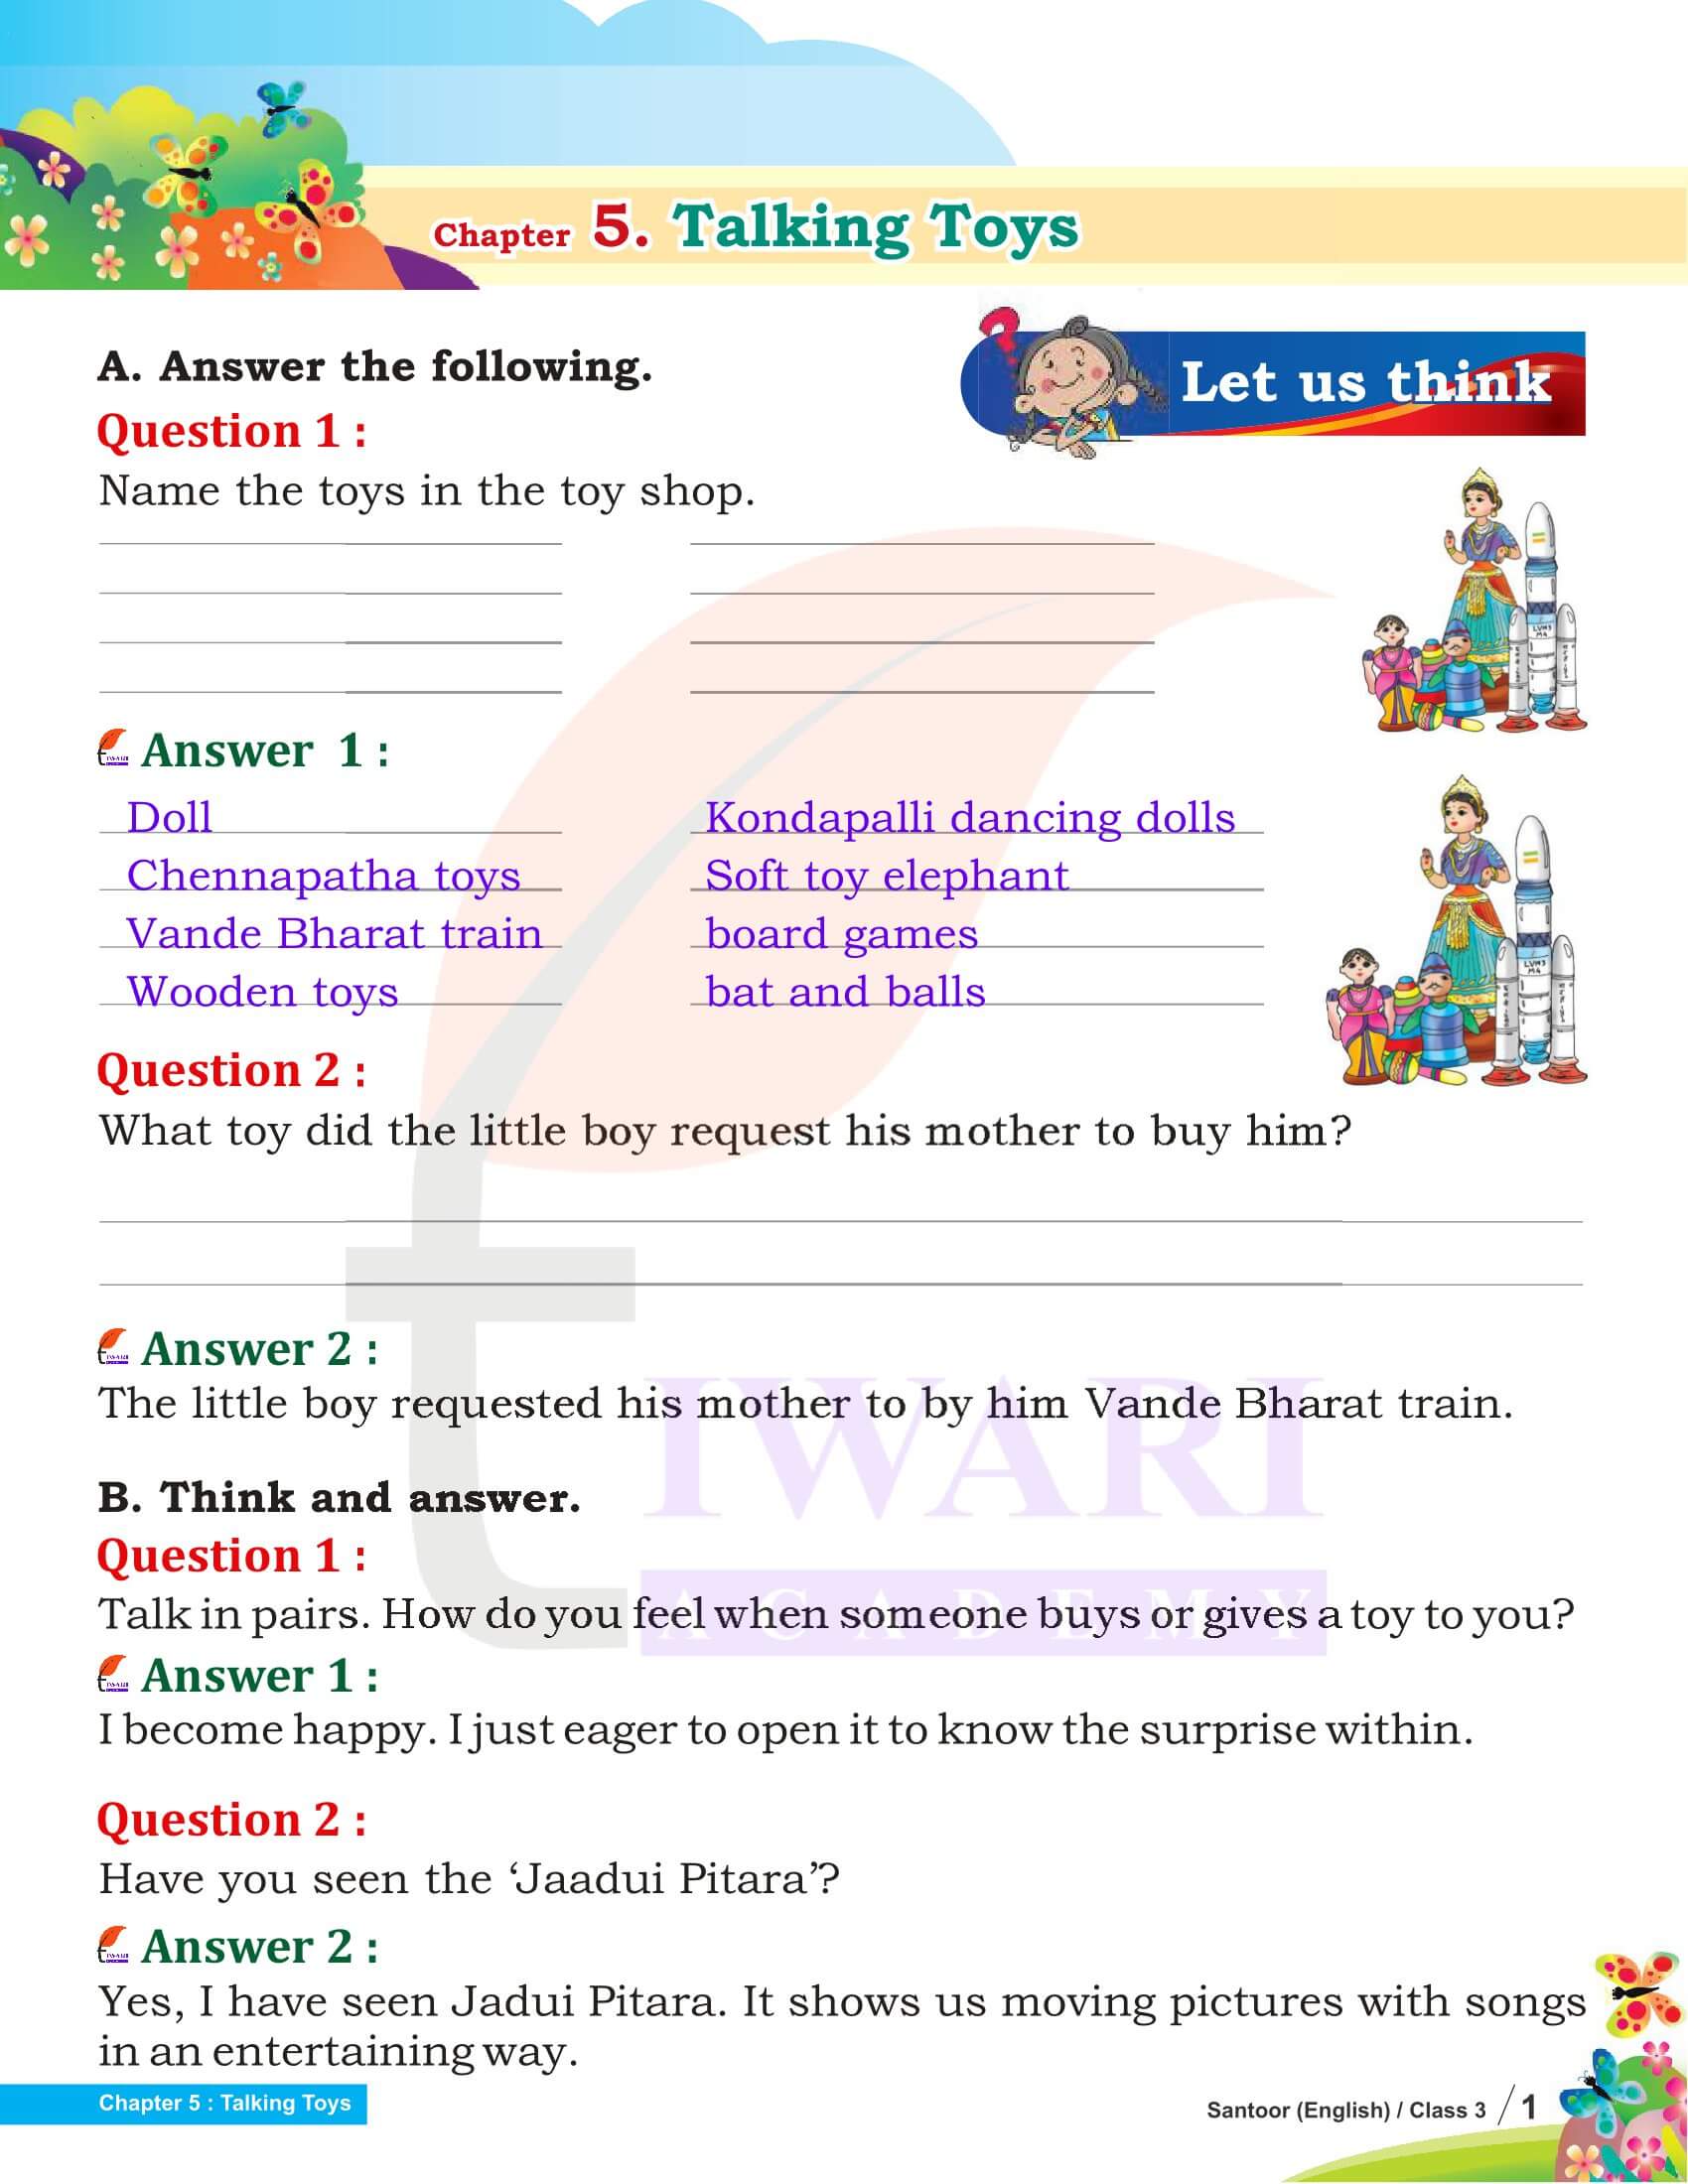 NCERT Solutions for Class 3 English Santoor Chapter 5 Question Answers